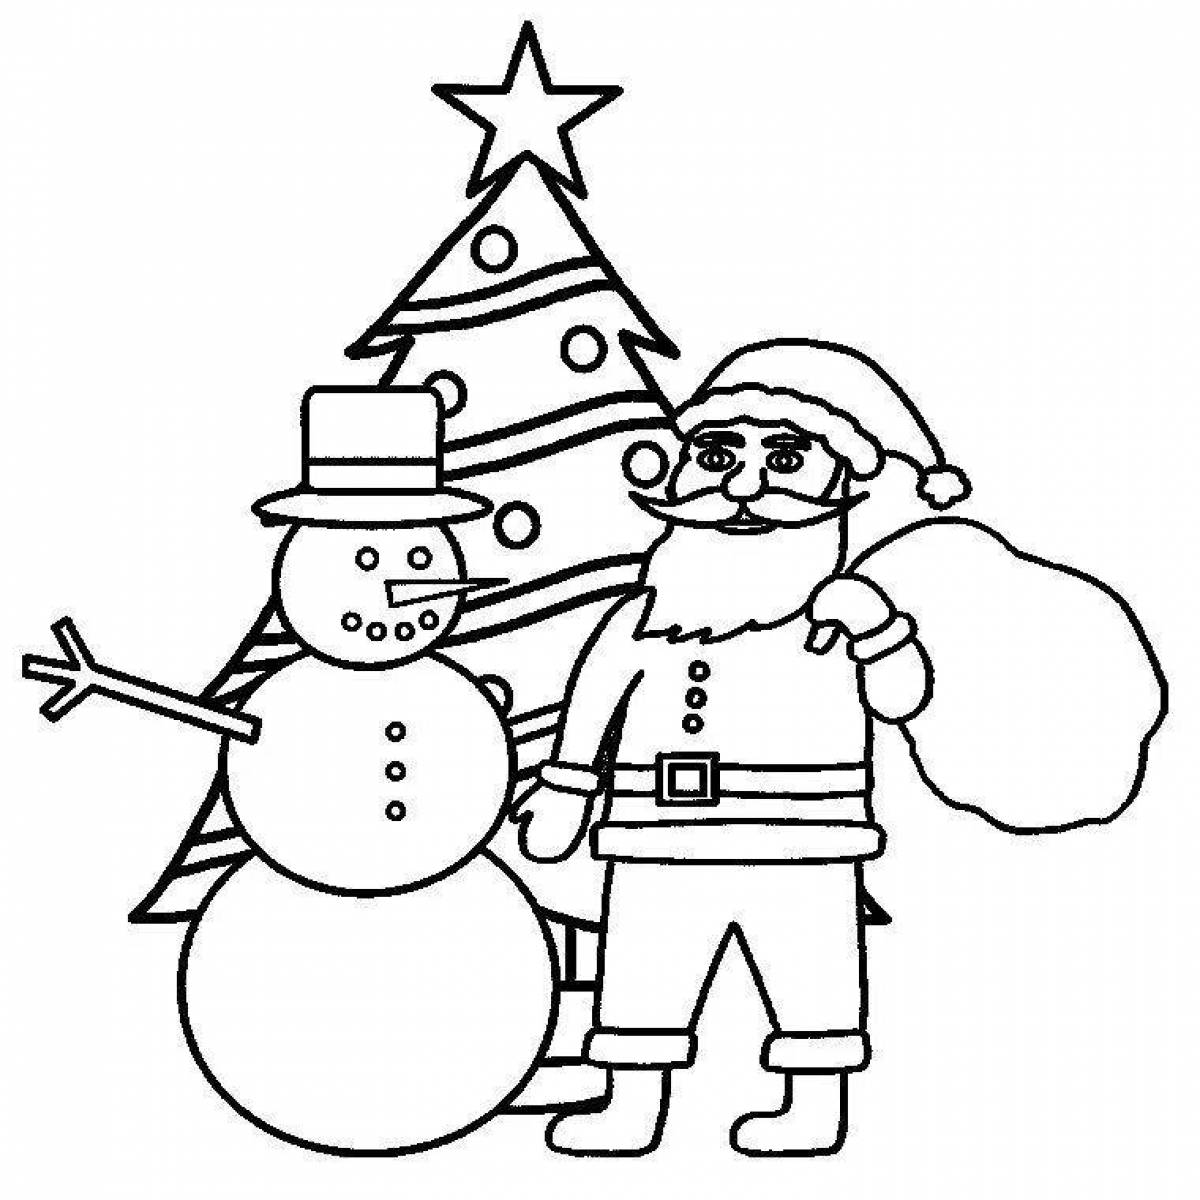 Fancy tree and snowman coloring page